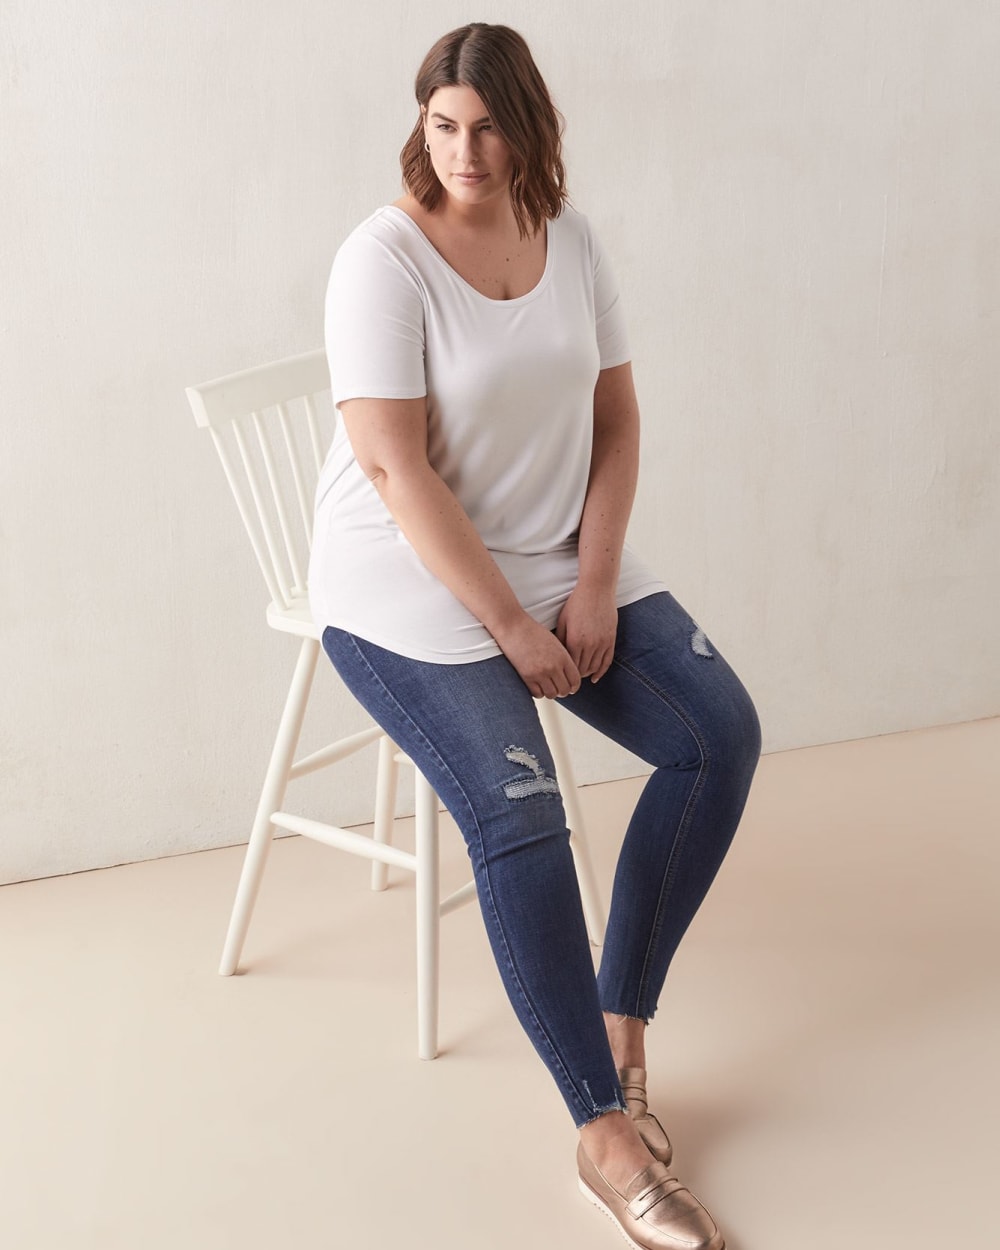 Modern Fit Solid Scoop Neck Tee - In Every Story